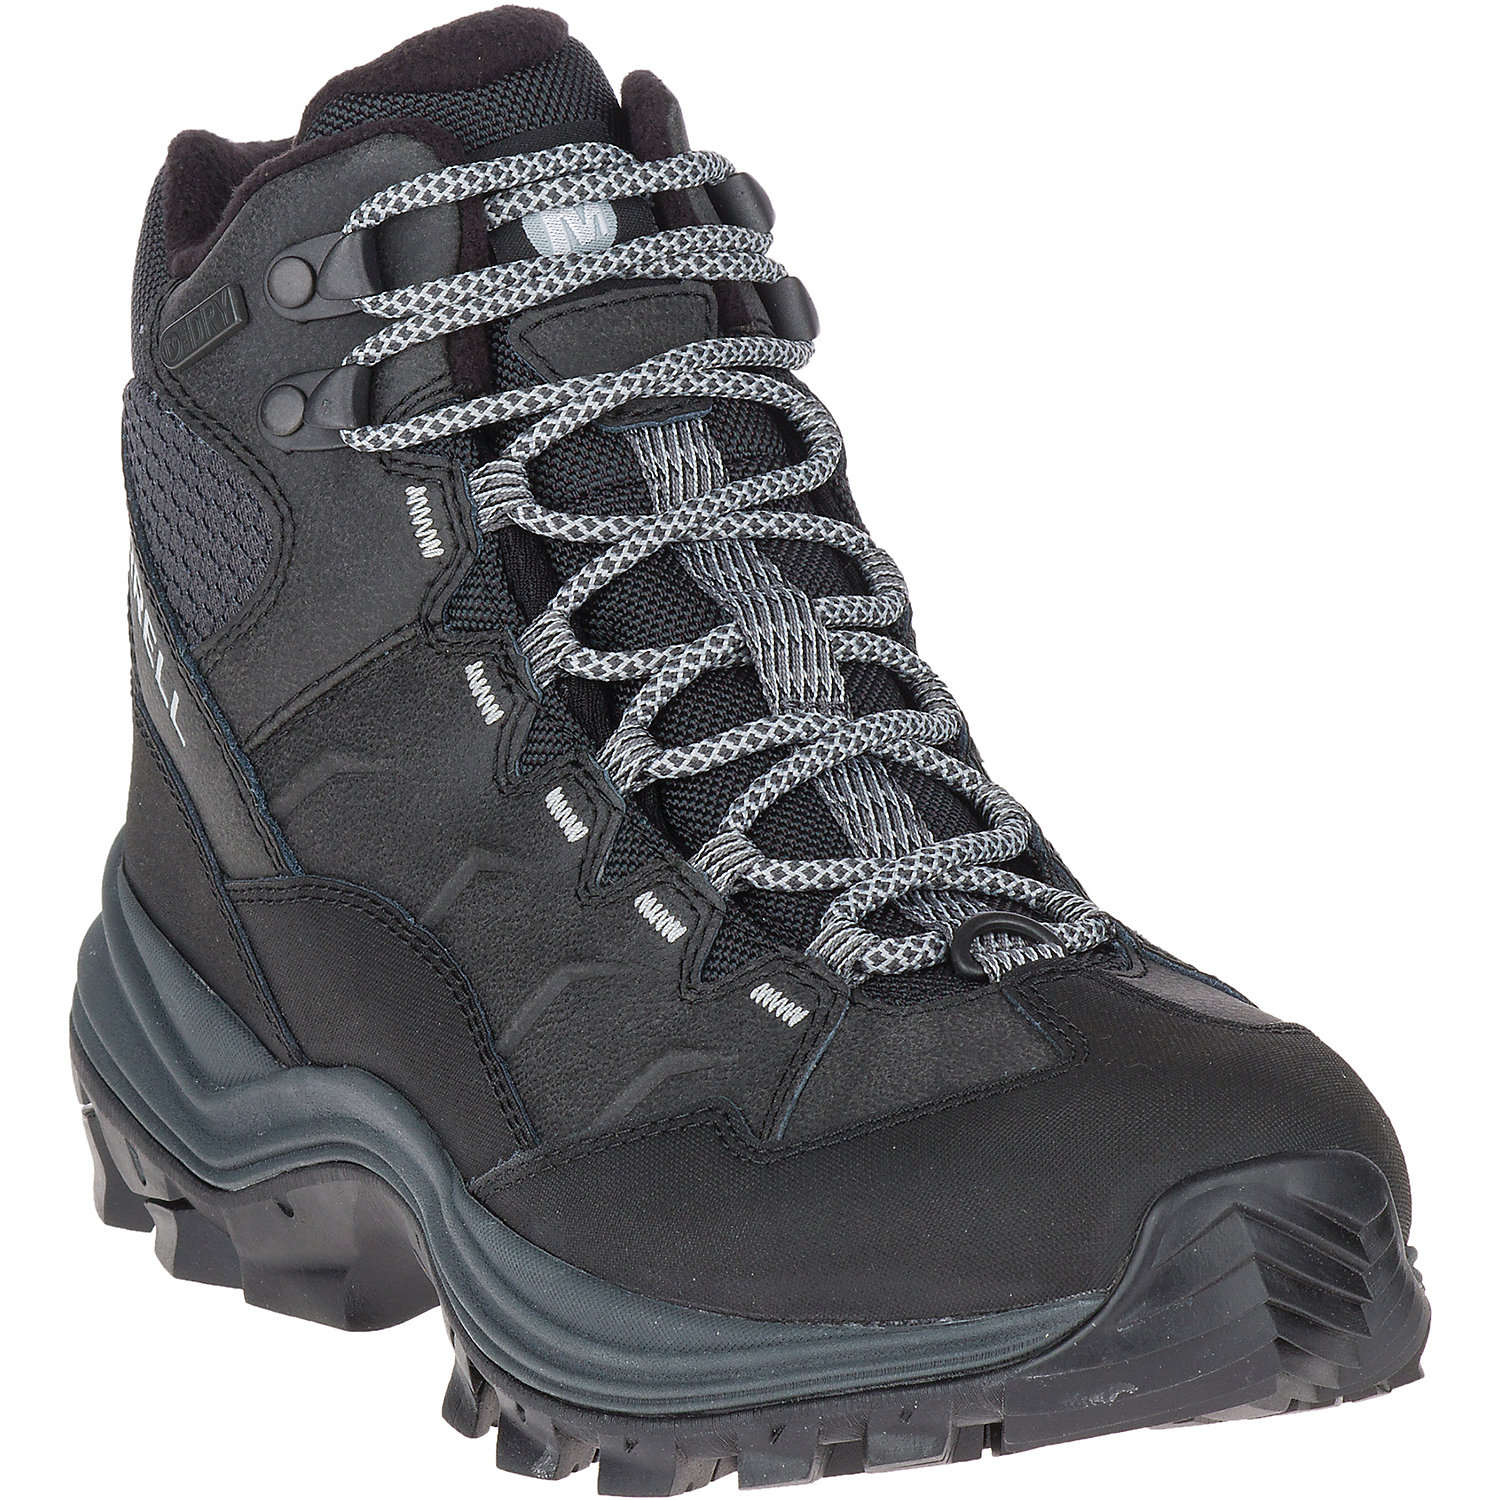 Merrell Womens Thermo Chill 6IN Waterproof Boot